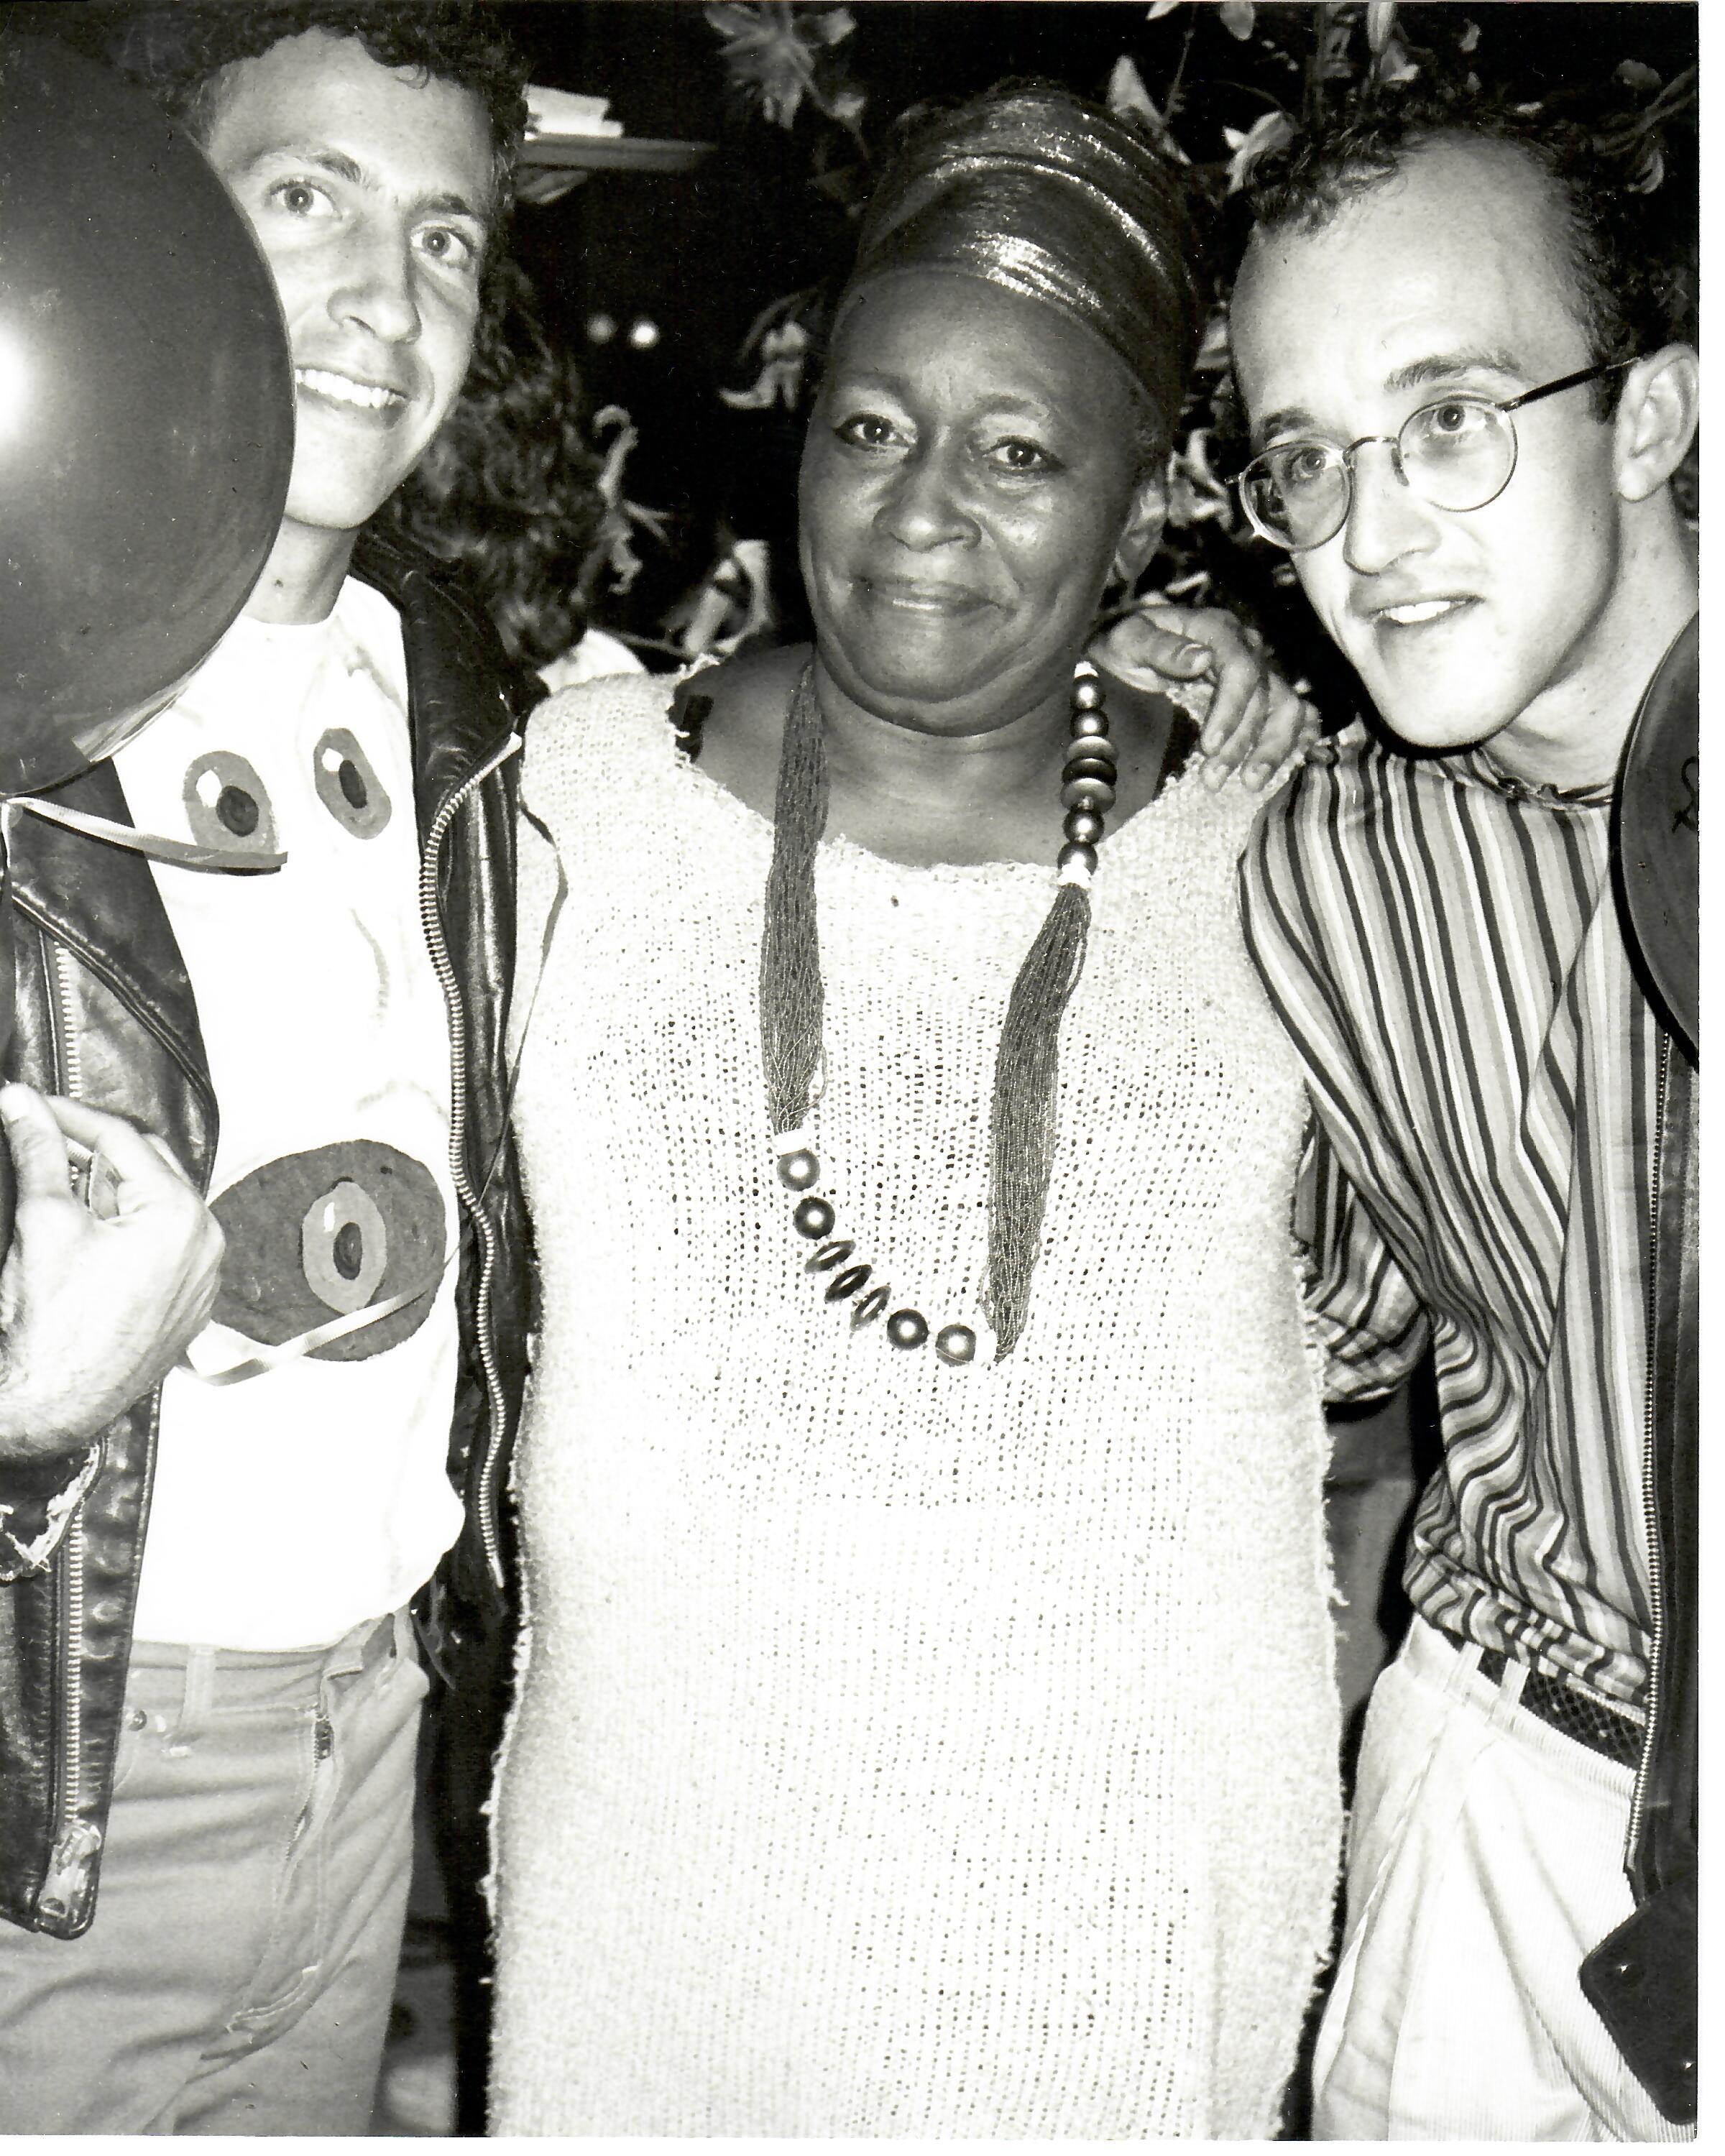 Andy Warhol Black and White Photograph - Kenny Scharf, Keith Haring and unidentified woman at nightclub